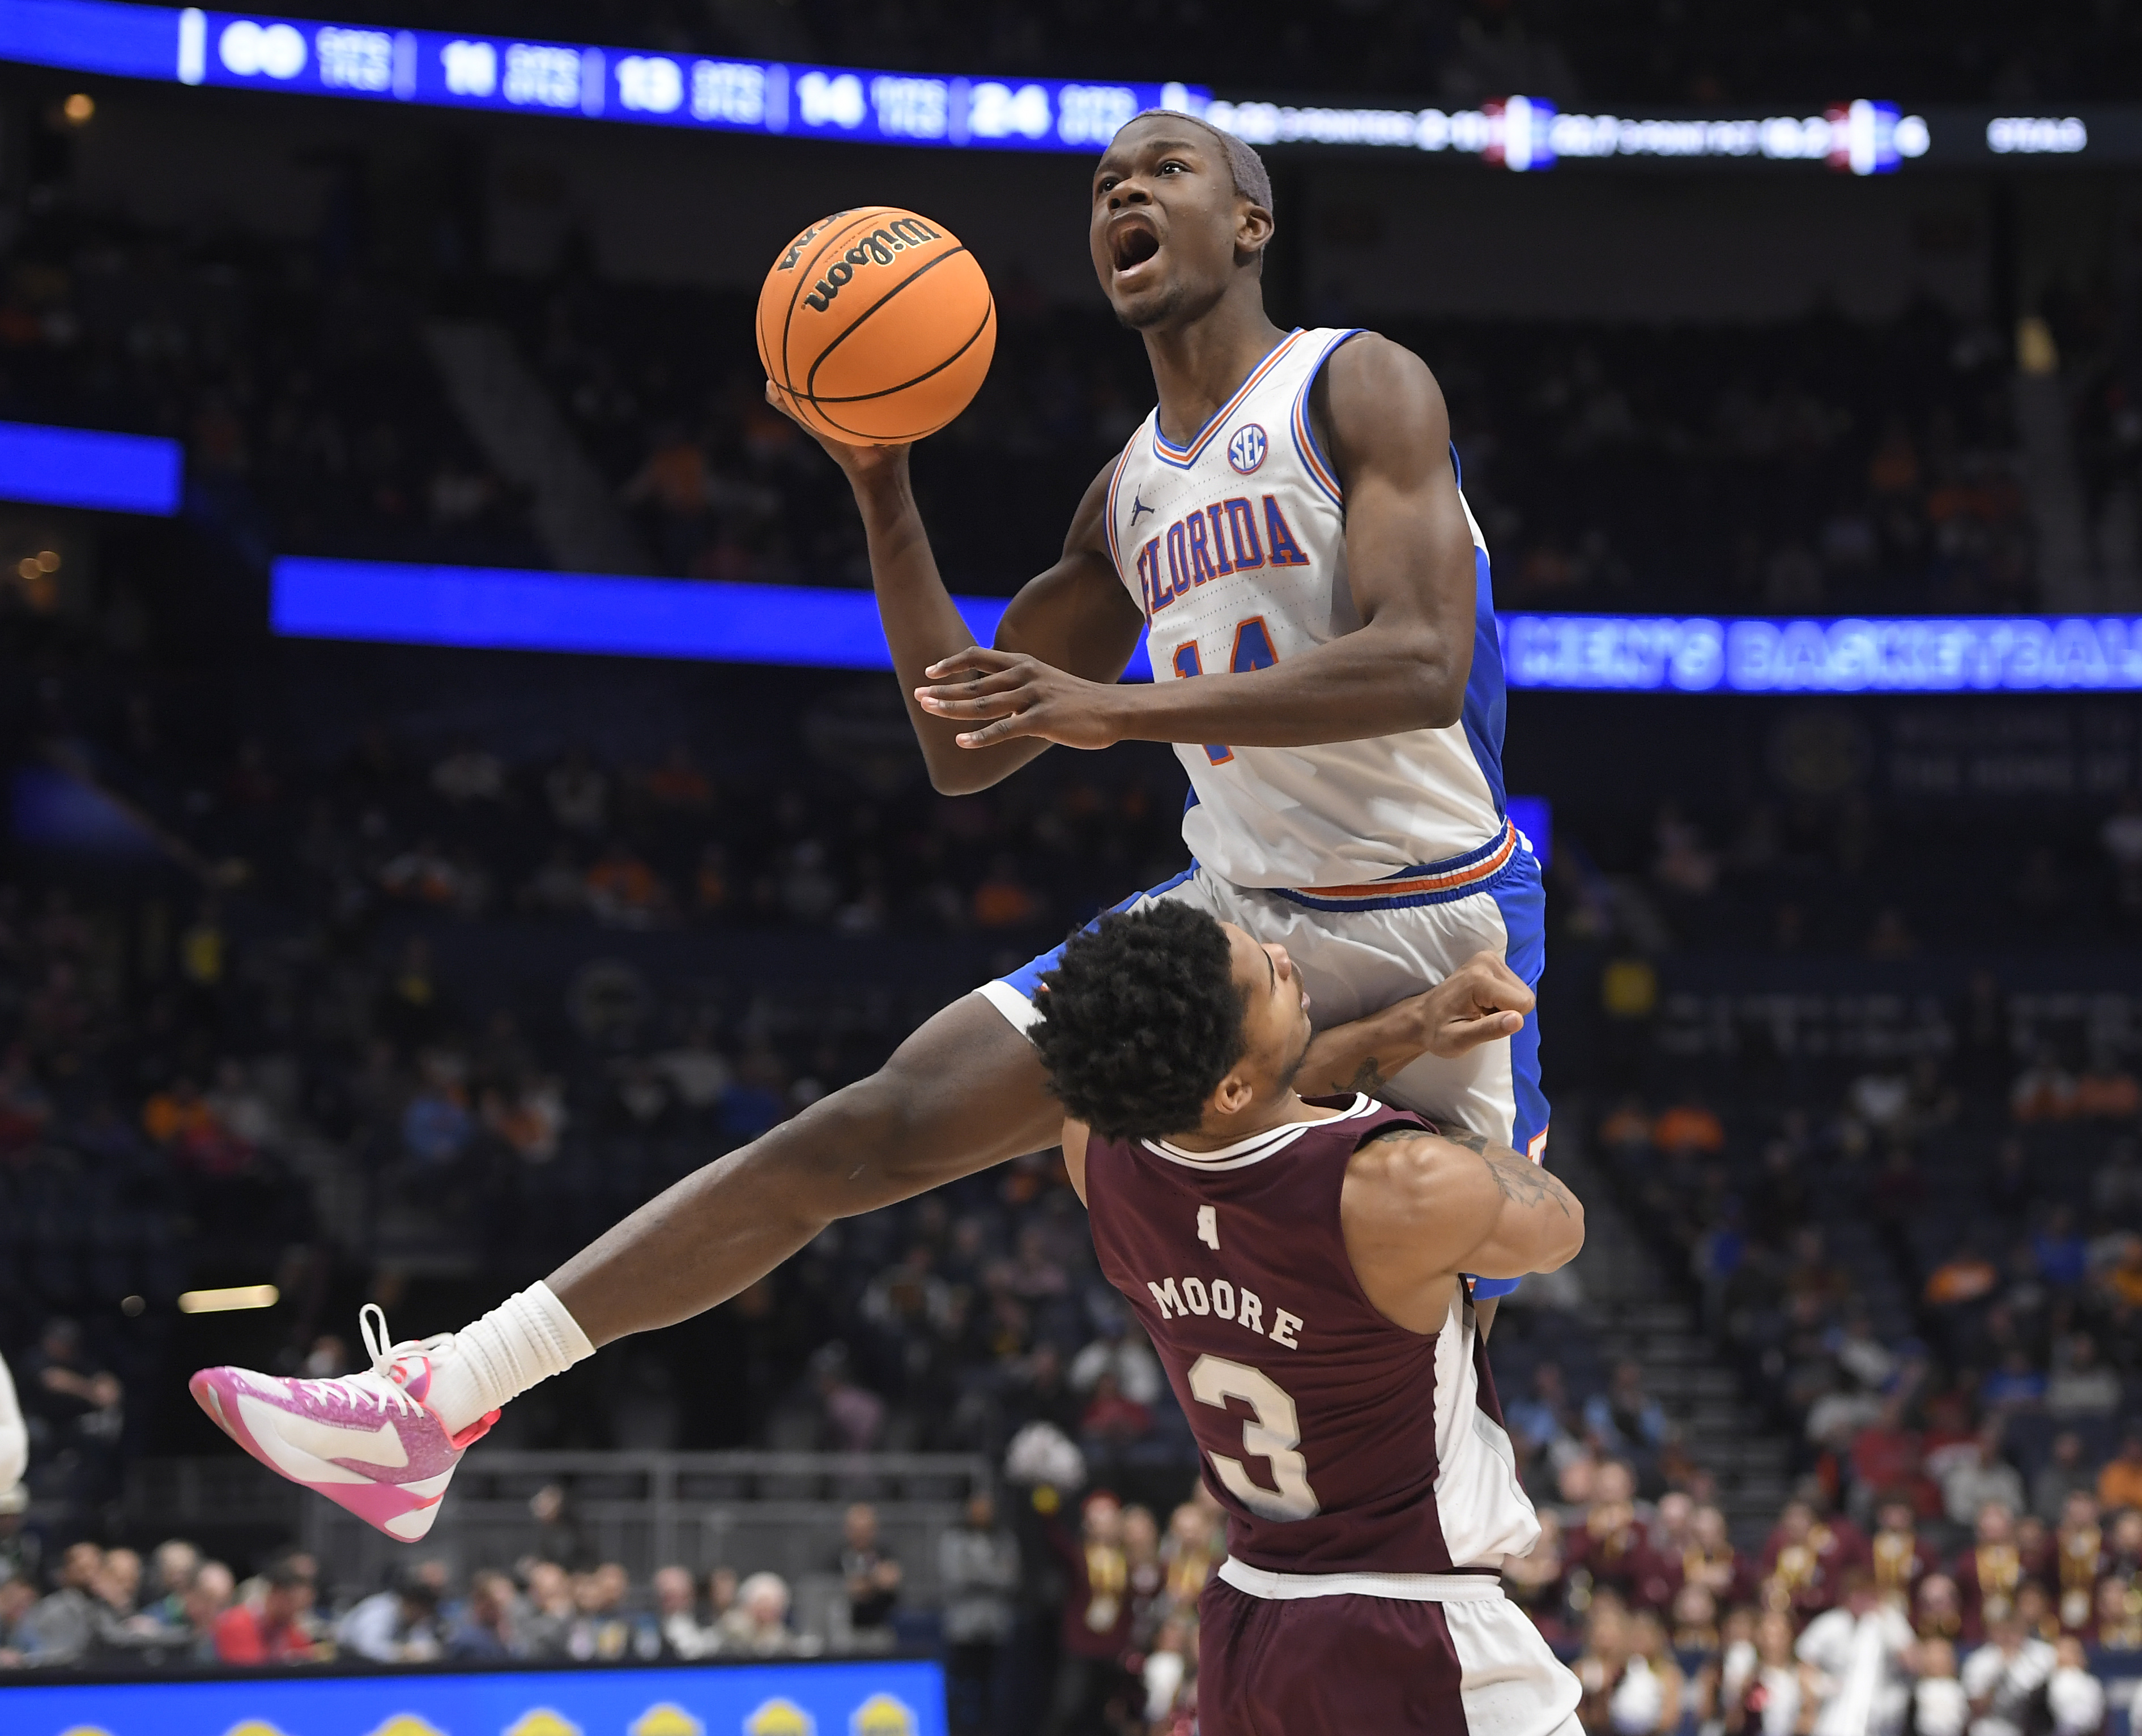 NCAA Basketball: SEC Conference Tournament Second Round - Mississippi State vs Florida